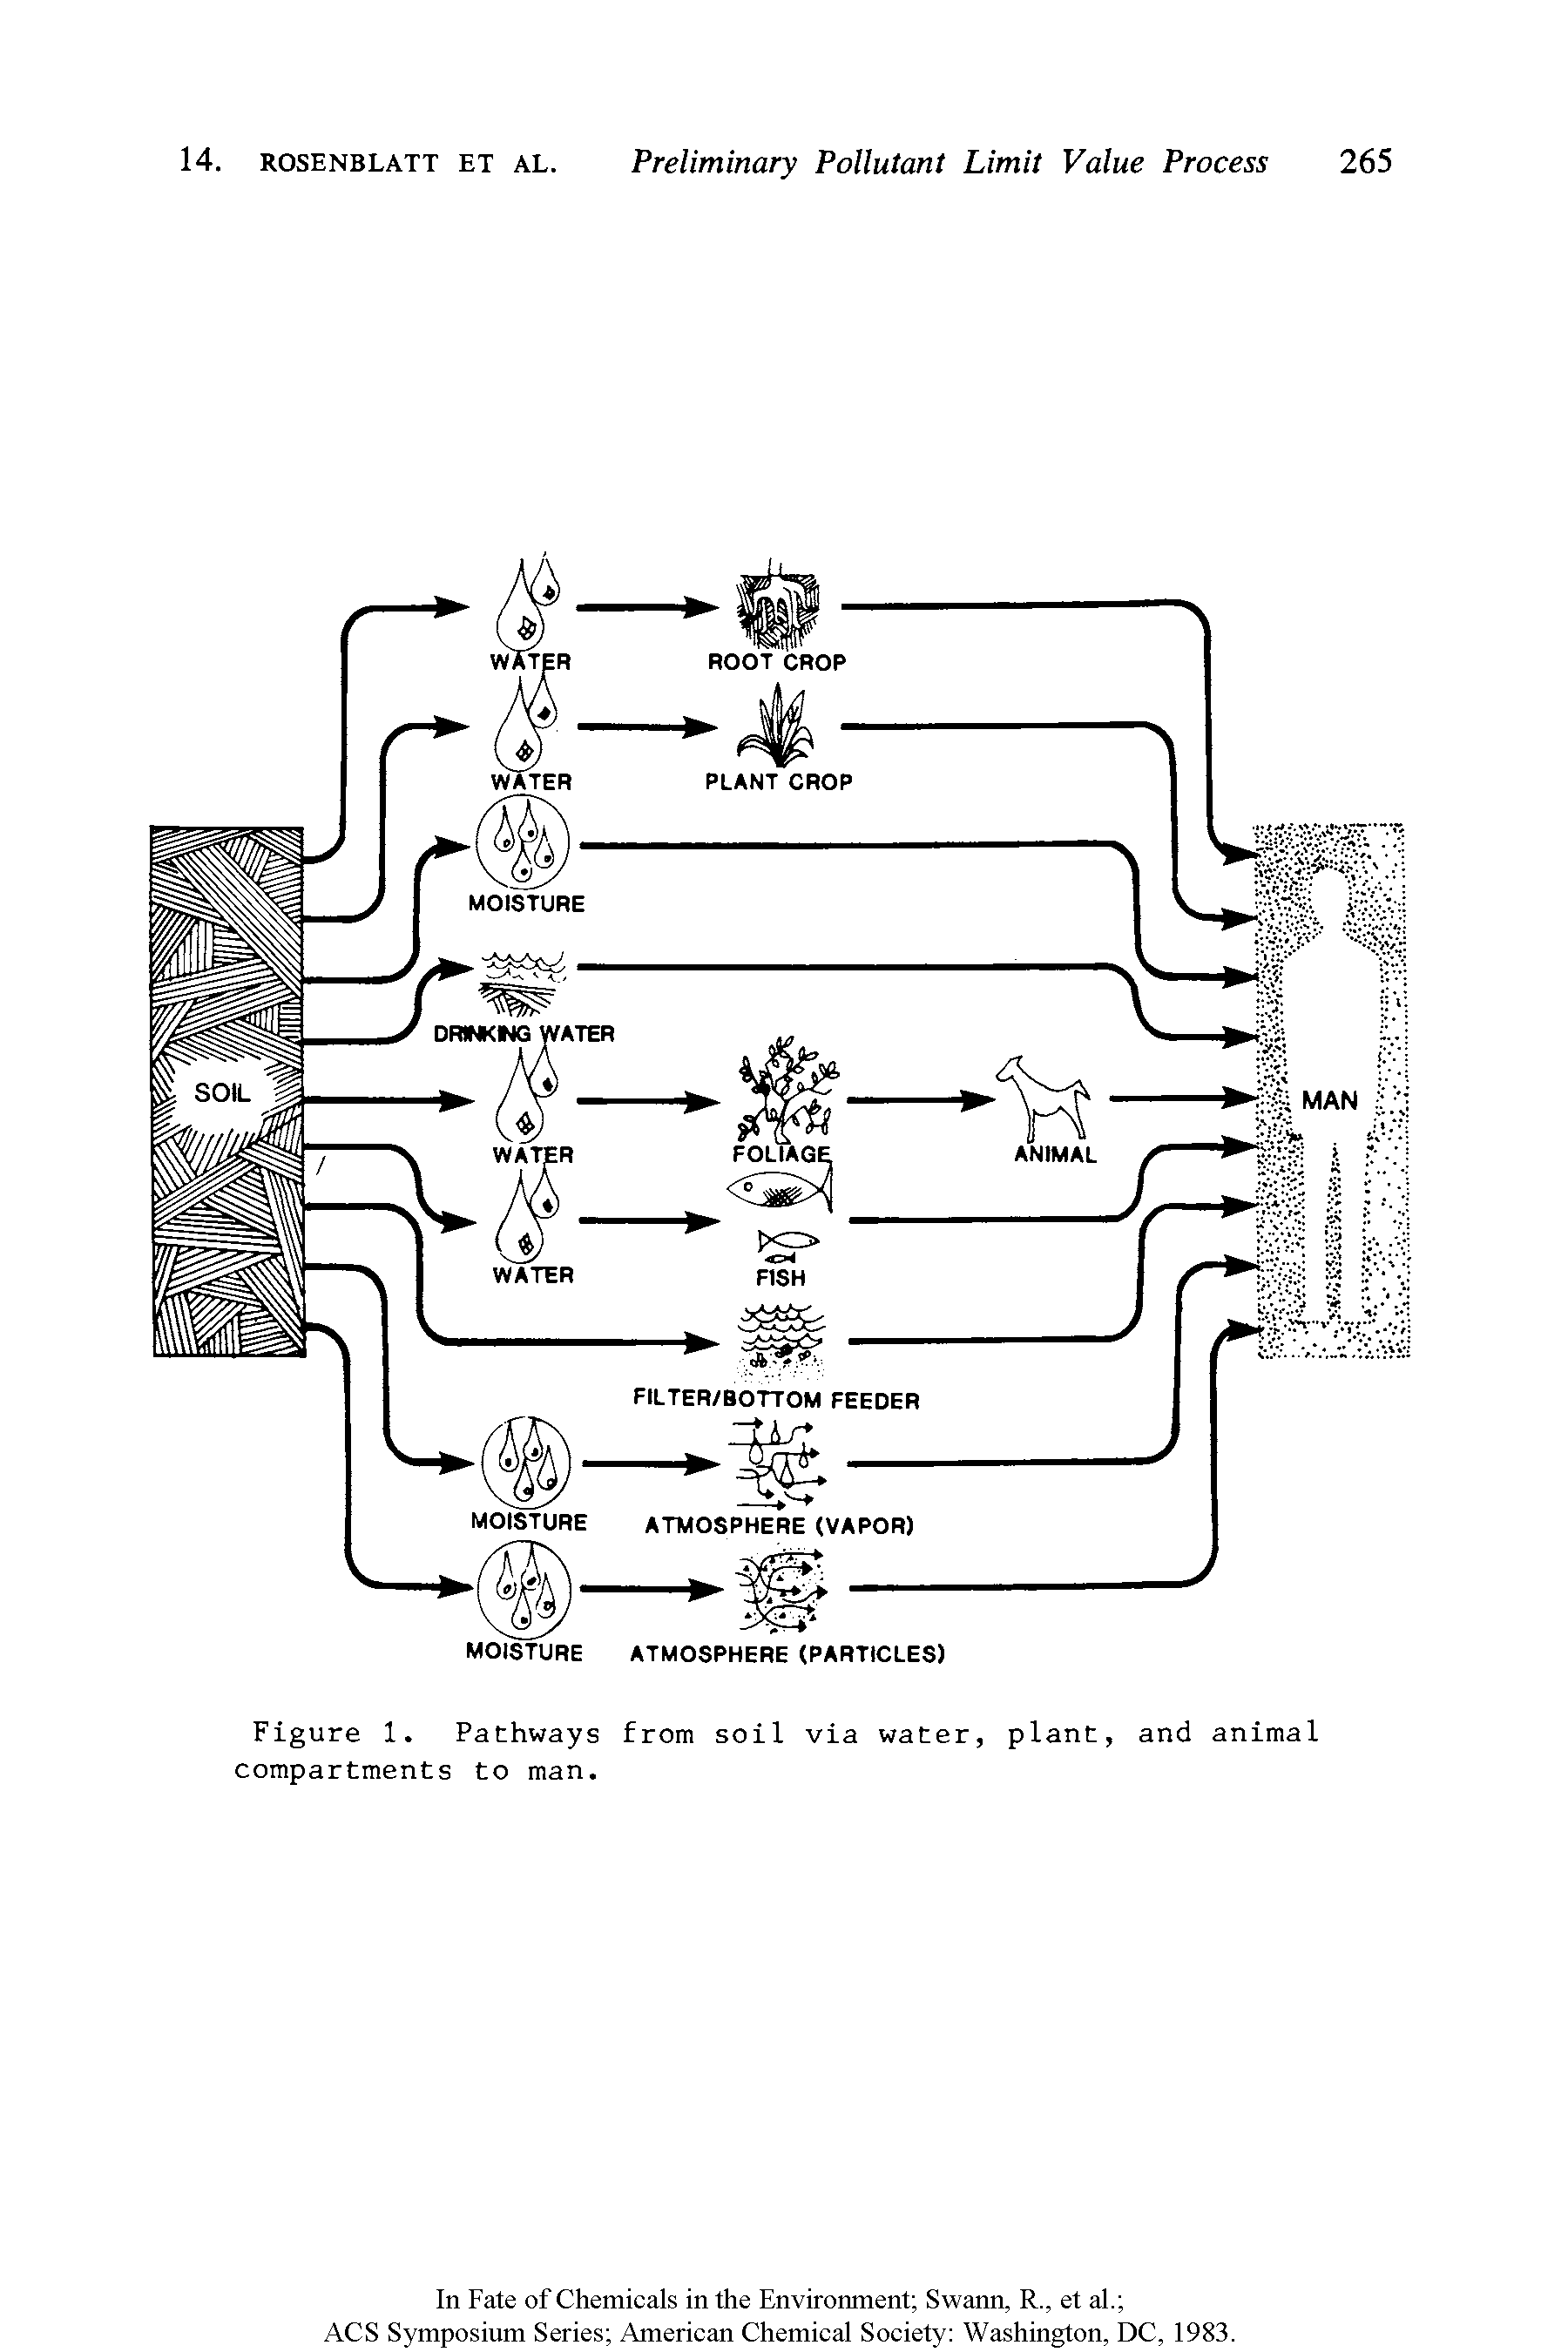 Figure 1. Pathways from soil via water, plant, and animal compartments to man.